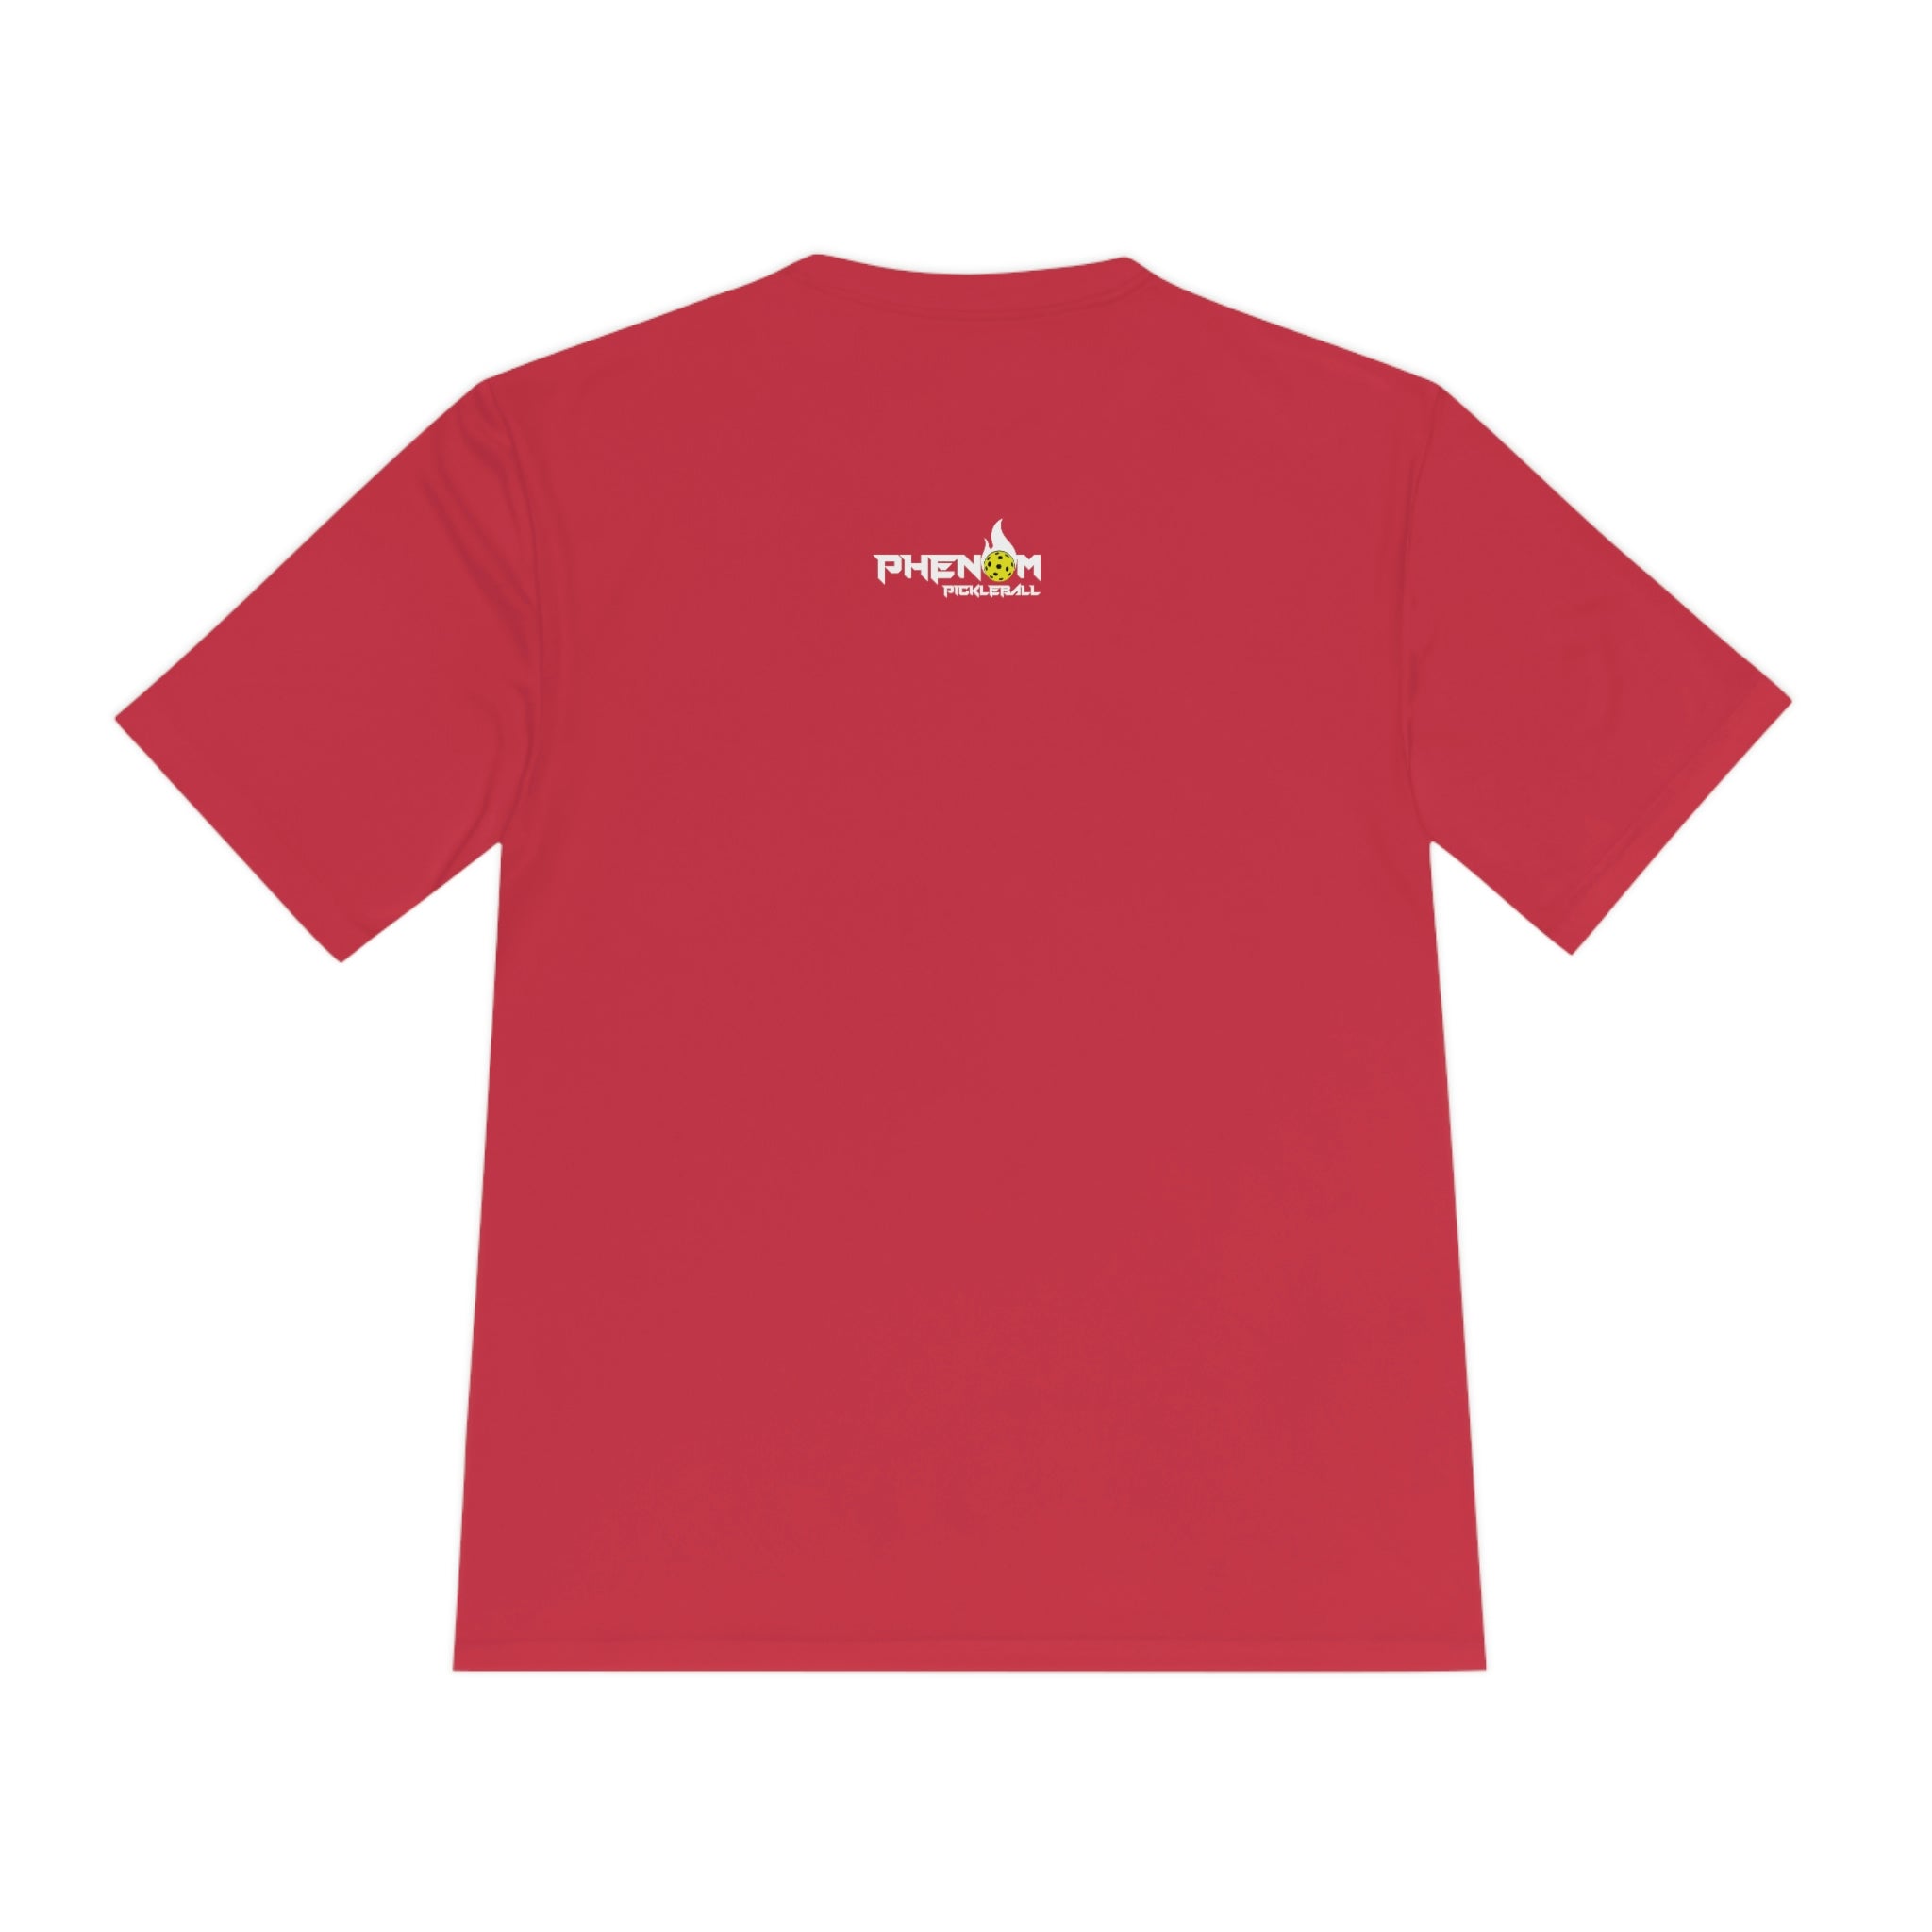 coral red dinks well with others athletic performance pickleball shirt apparel phenom logo back view